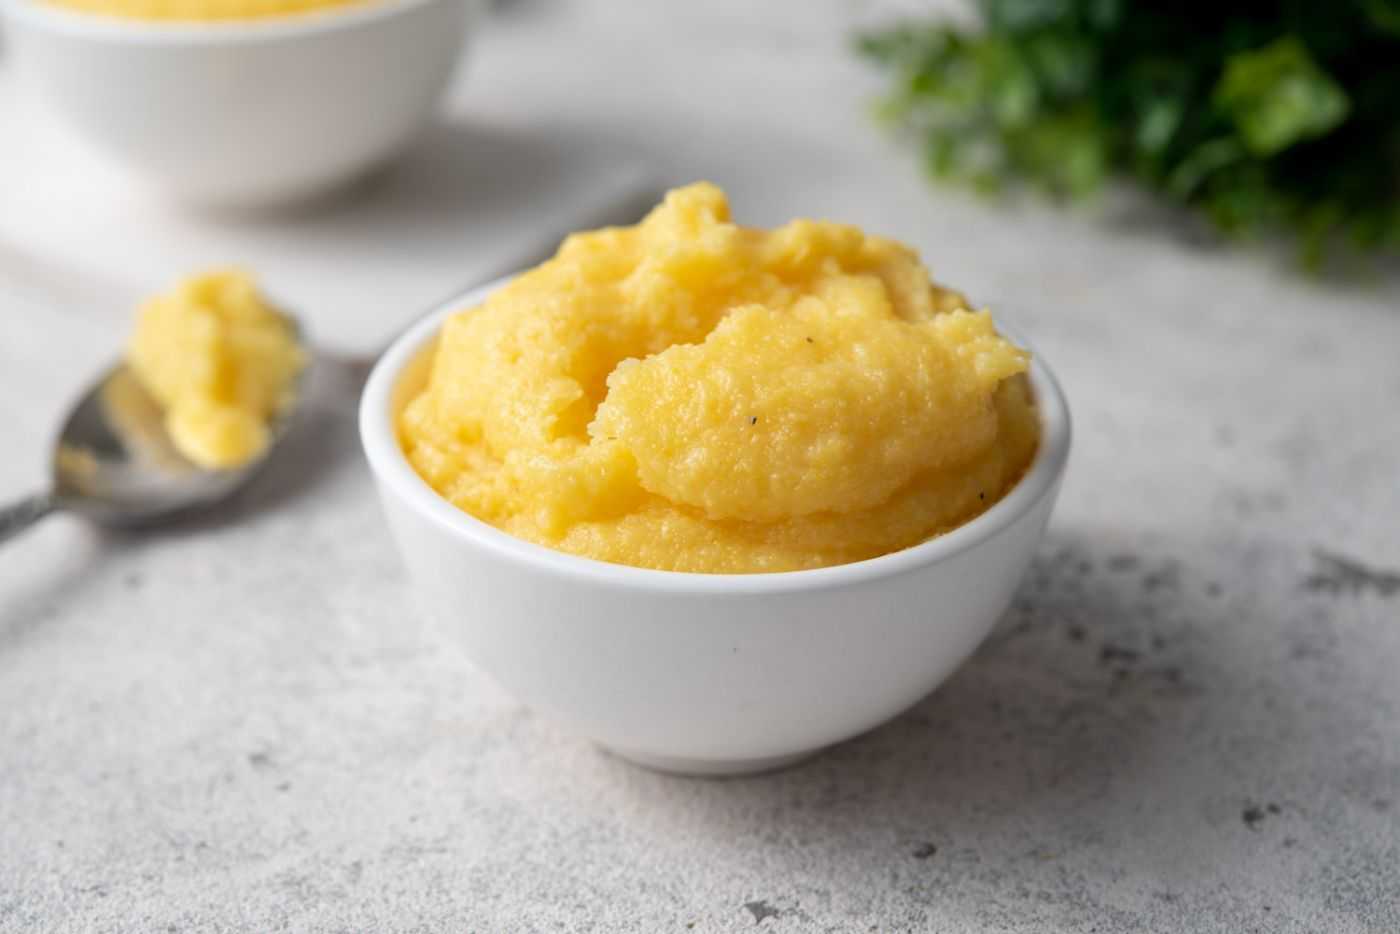 Polenta inside white bowl with spoon filled with polenta